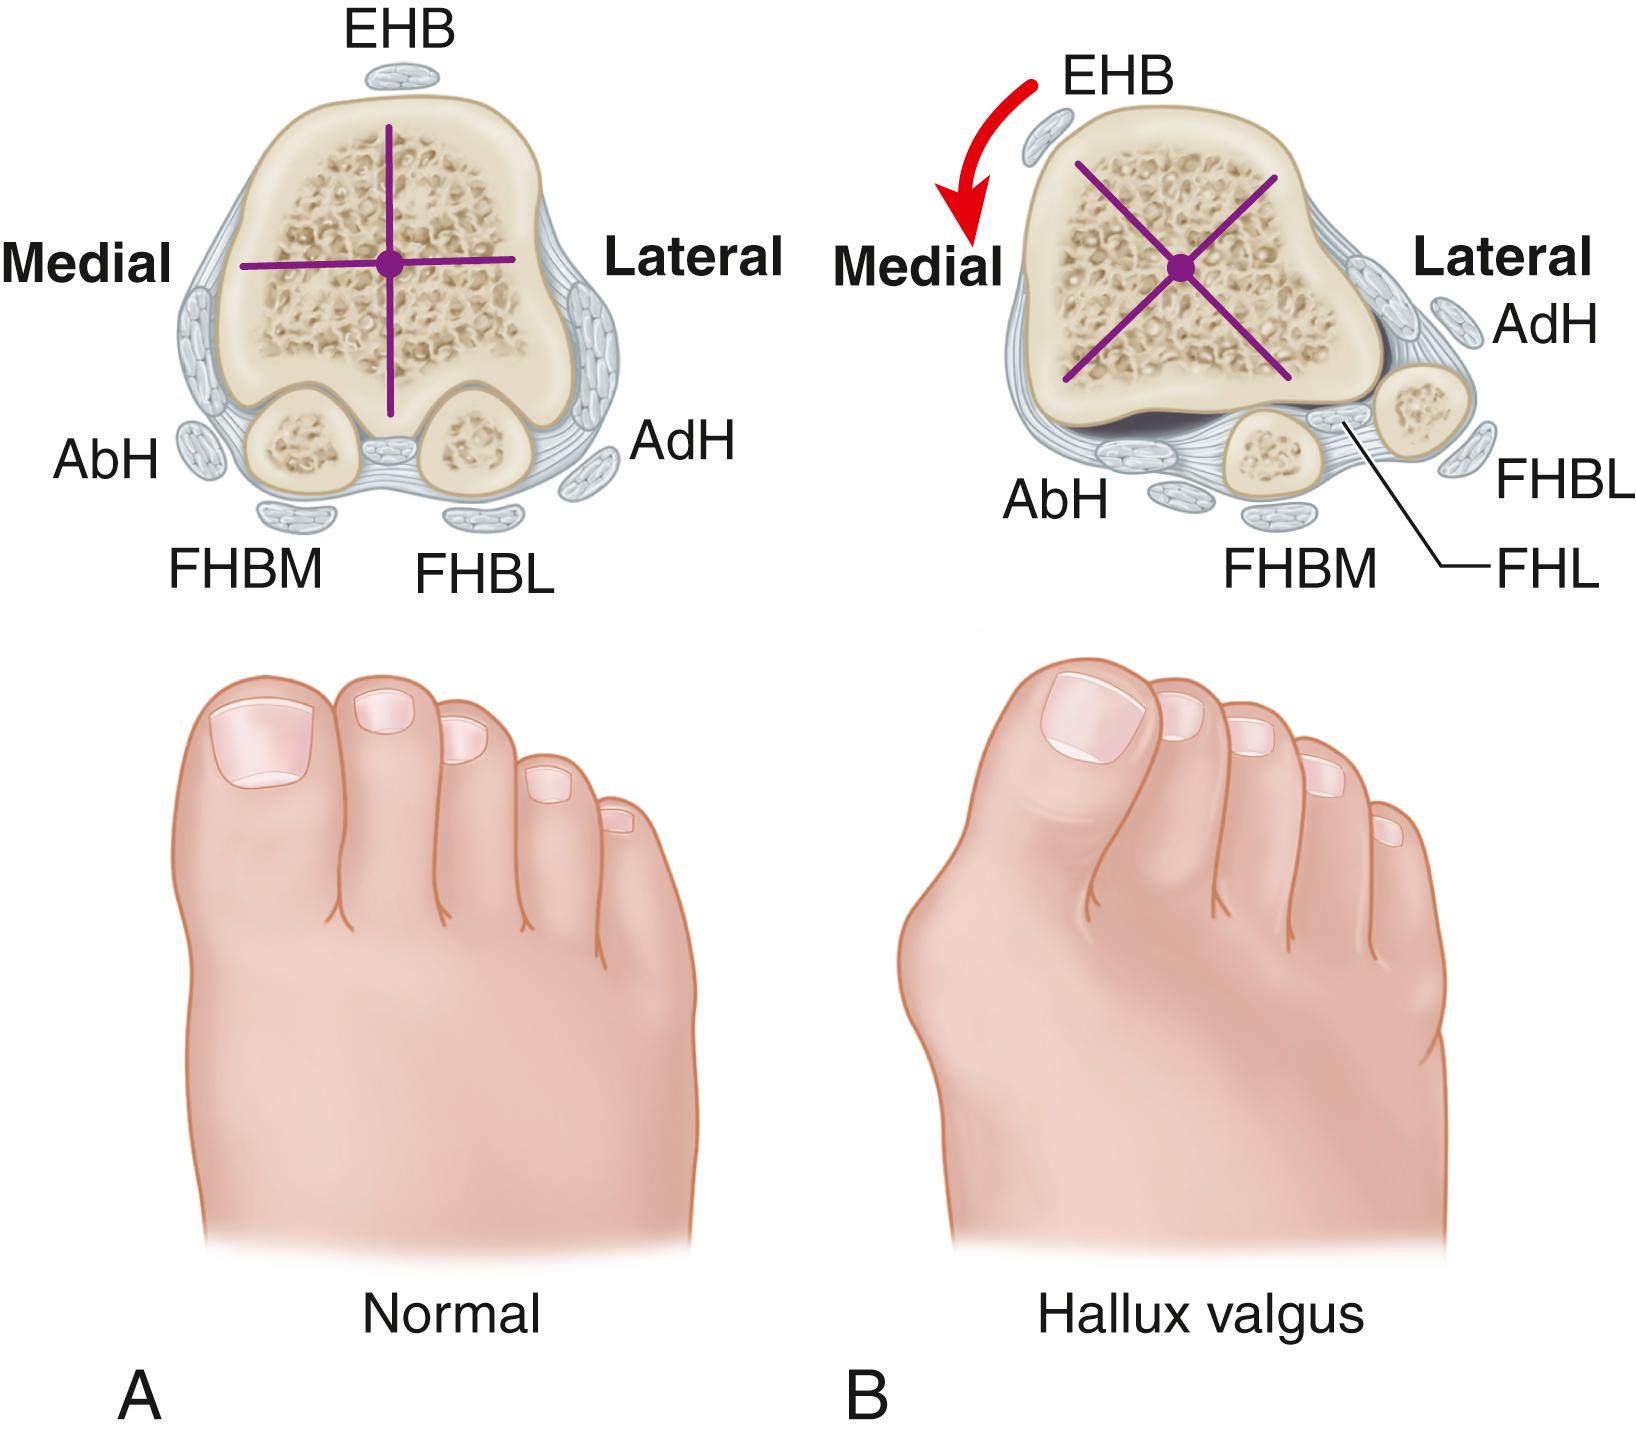 FIGURE 82.2, Pronation of hallux. A, Normal. B, Note plantar shift of abductor hallucis and lateral shift of sesamoids with associated intrinsic muscles of hallux. AbH , Abductor hallucis; AdH , adductor hallucis; EHB , extensor hallucis brevis; FHBL , flexor hallucis brevis lateral; FHBM , flexor hallucis brevis medial.